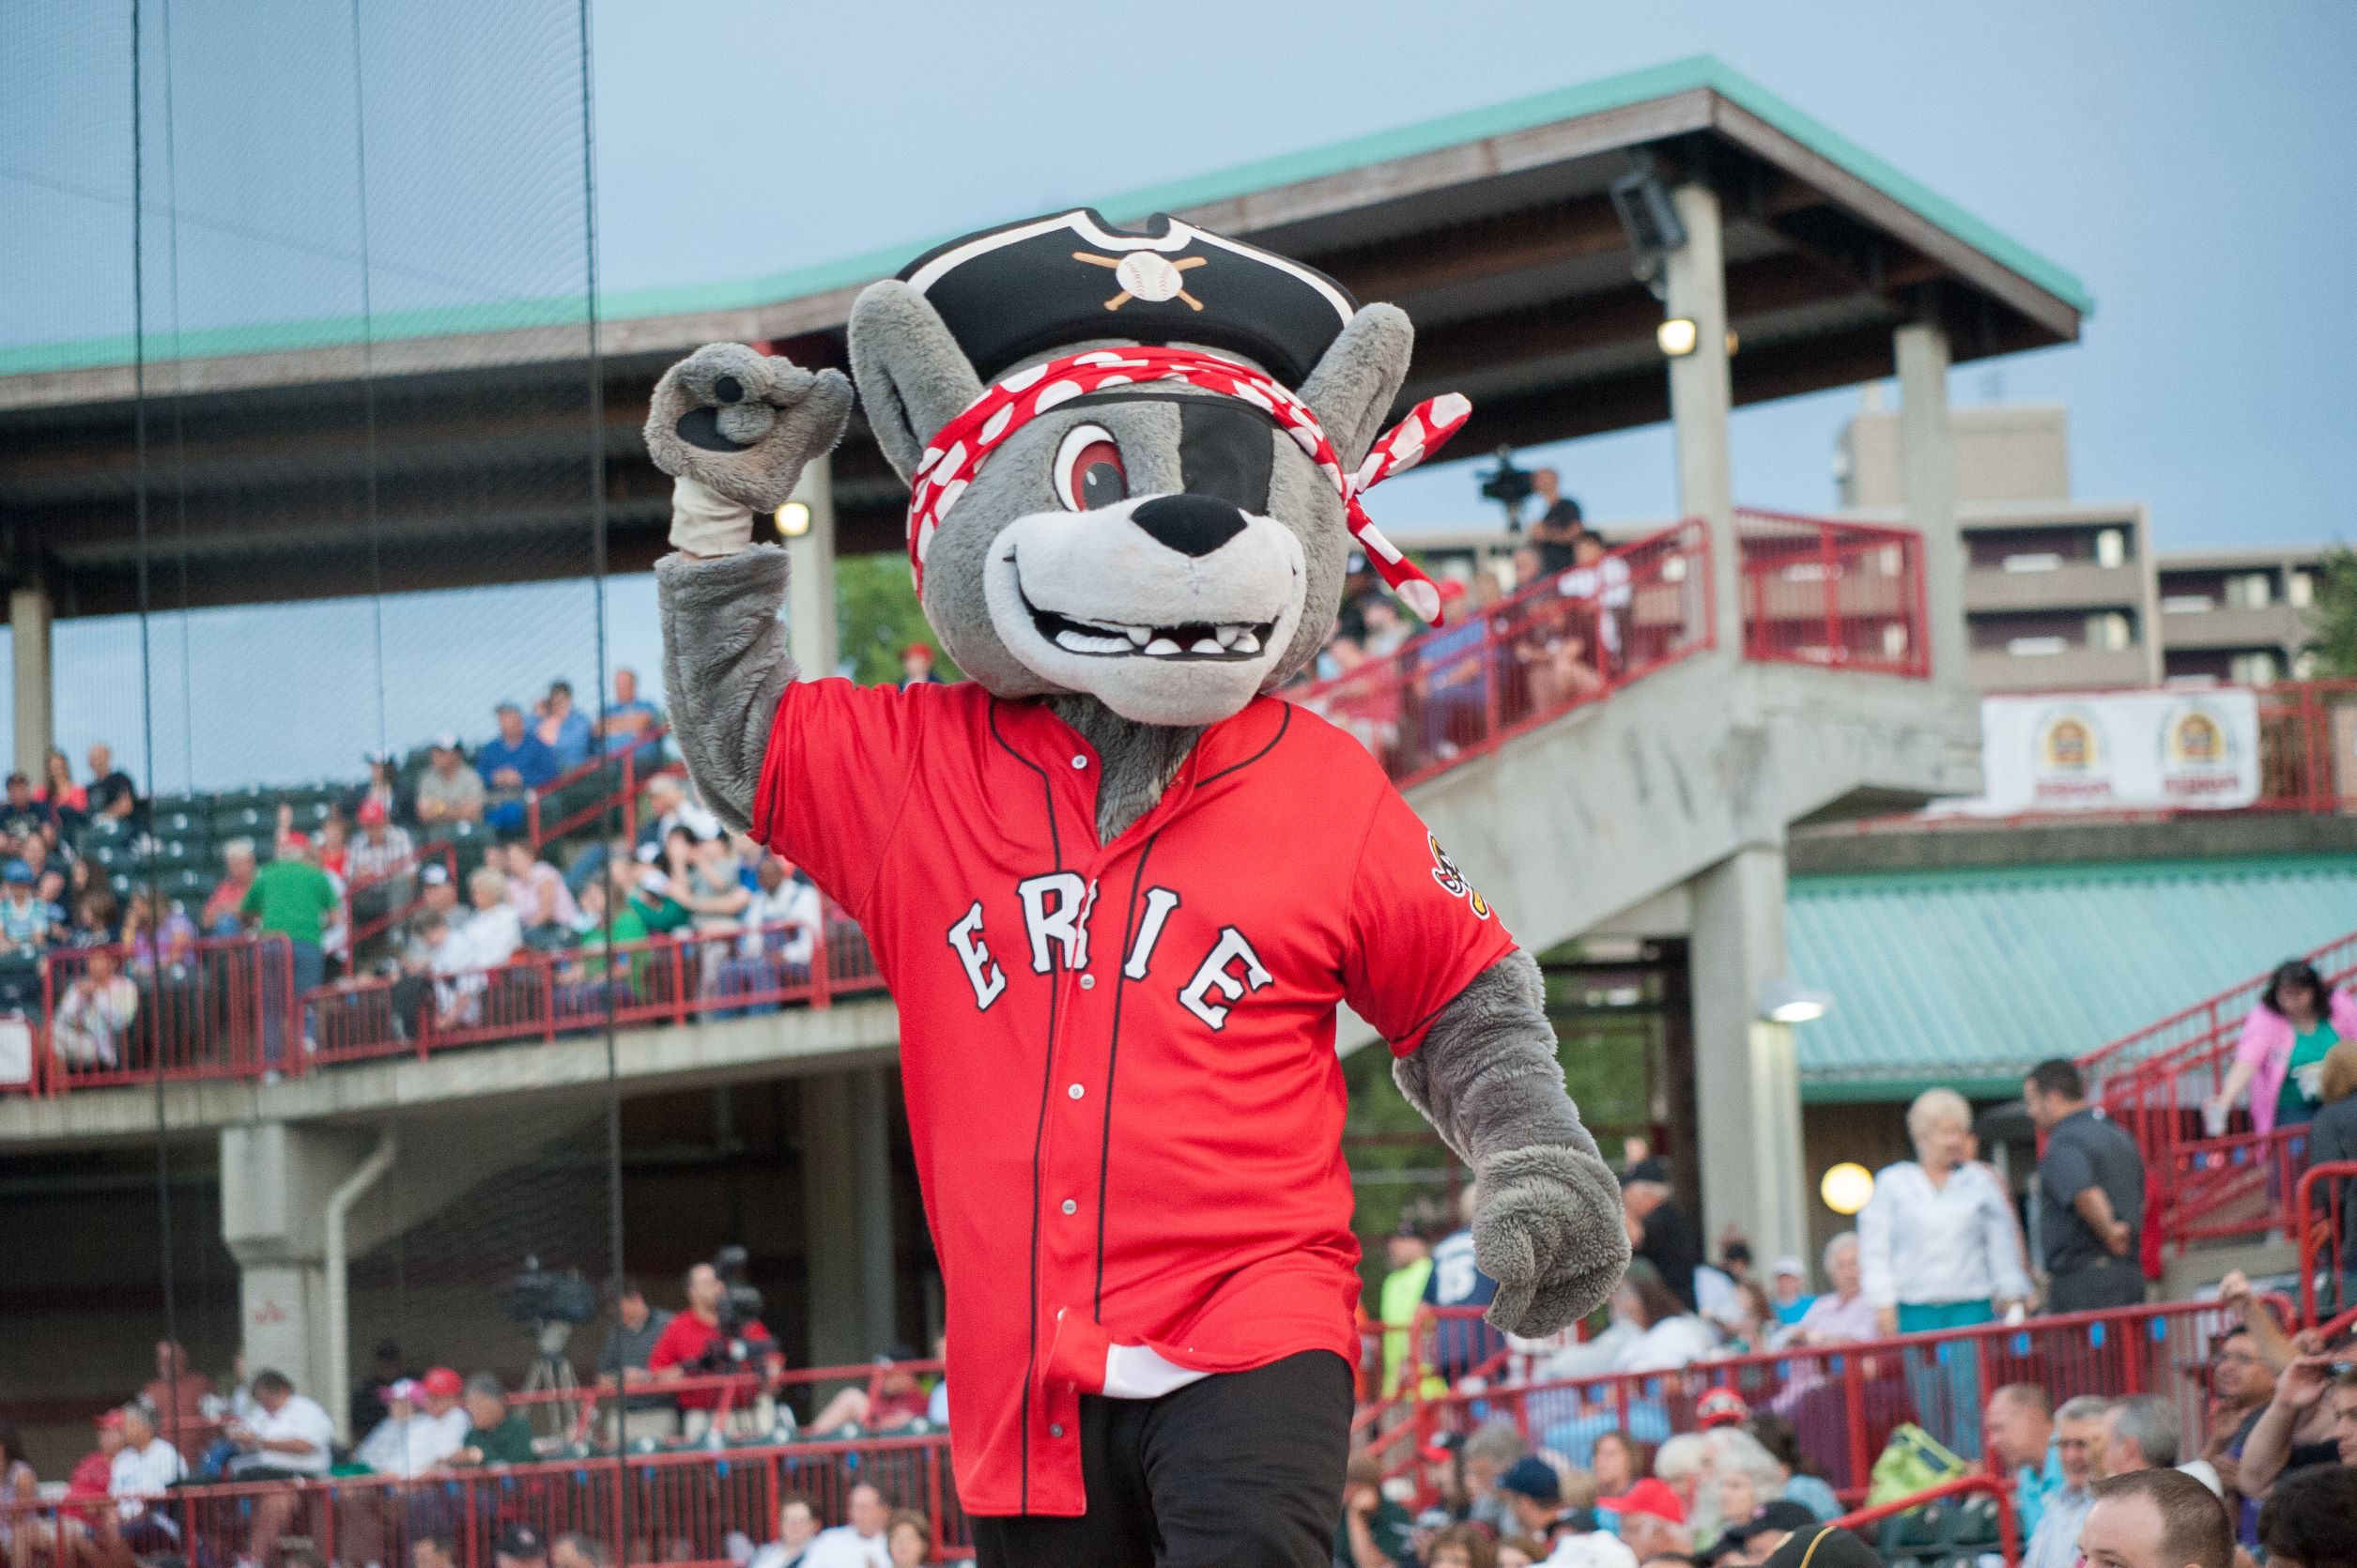 Erie SeaWolves vs. New Hampshire Fisher Cats